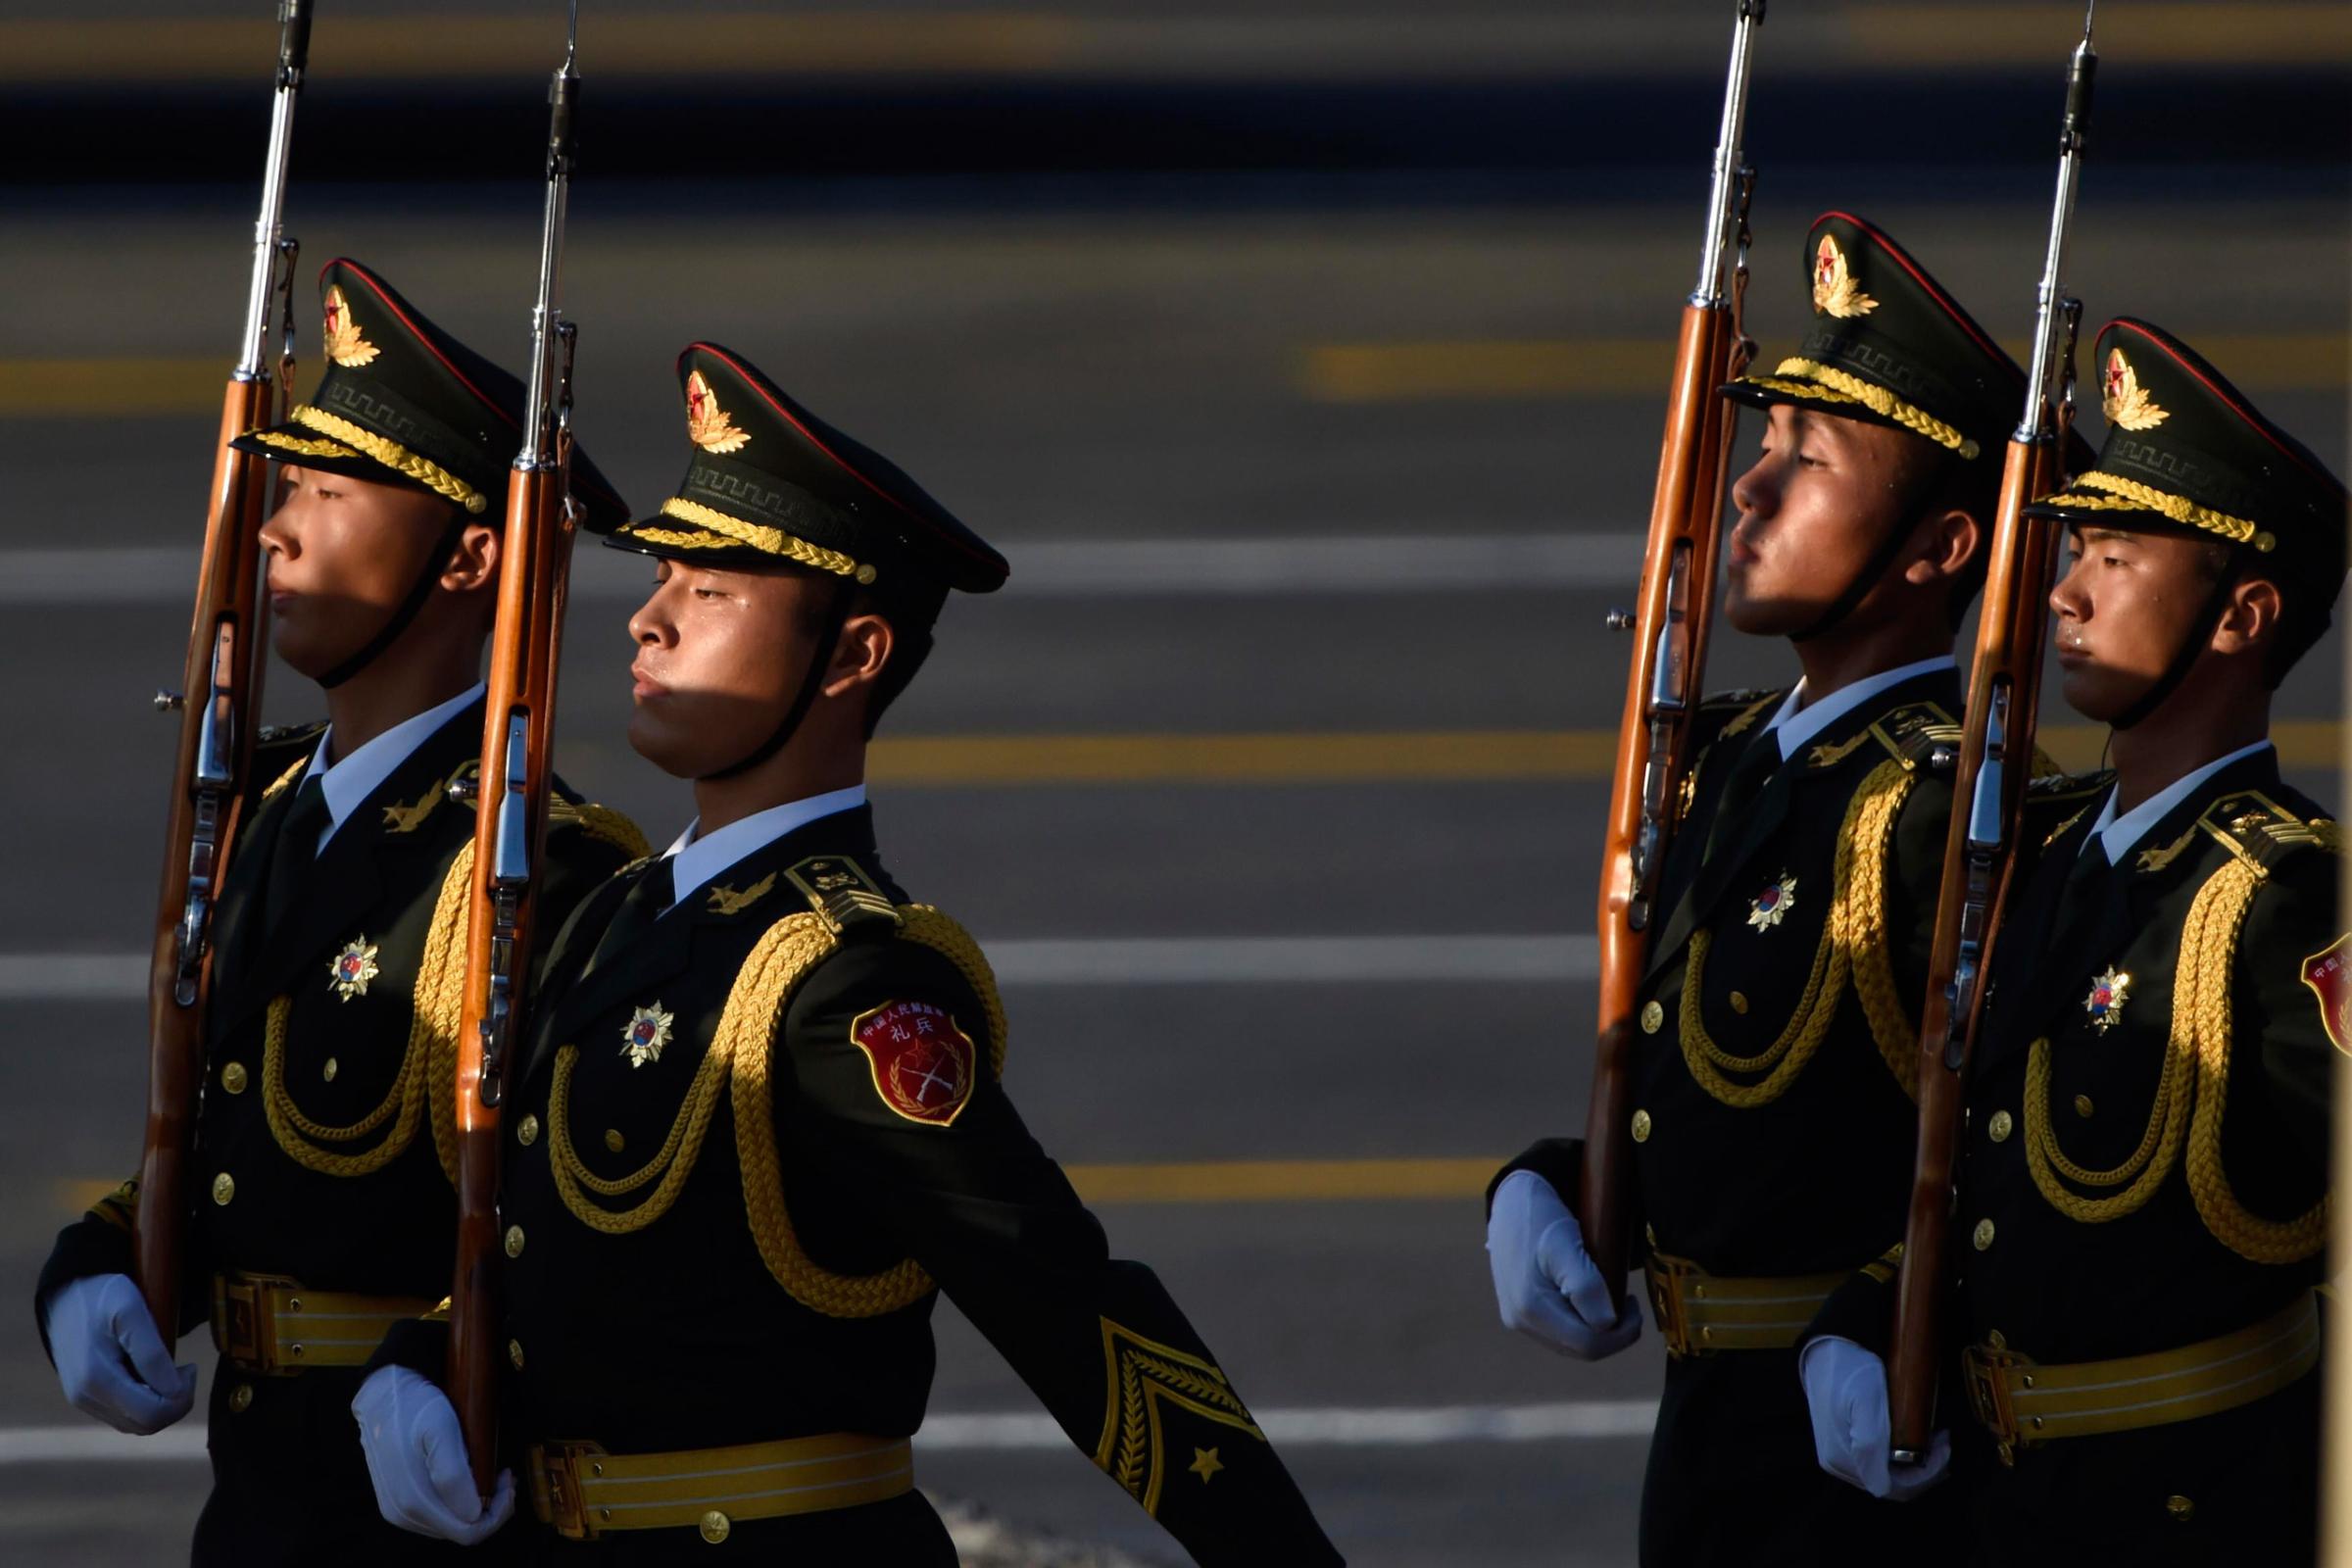 BEIJING, CHINA - SEPTEMBER 03: (CHINA OUT) Guards of honor walk past Tiananmen Gate during the 9.3 military parade on September 3, 2015 in Beijing, China. China is marking the 70th anniversary of the end of World War II and its role in defeating Japan with a new national holiday and a military parade in Beijing. (Photo by ChinaFotoPress/ChinaFotoPress via Getty Images)